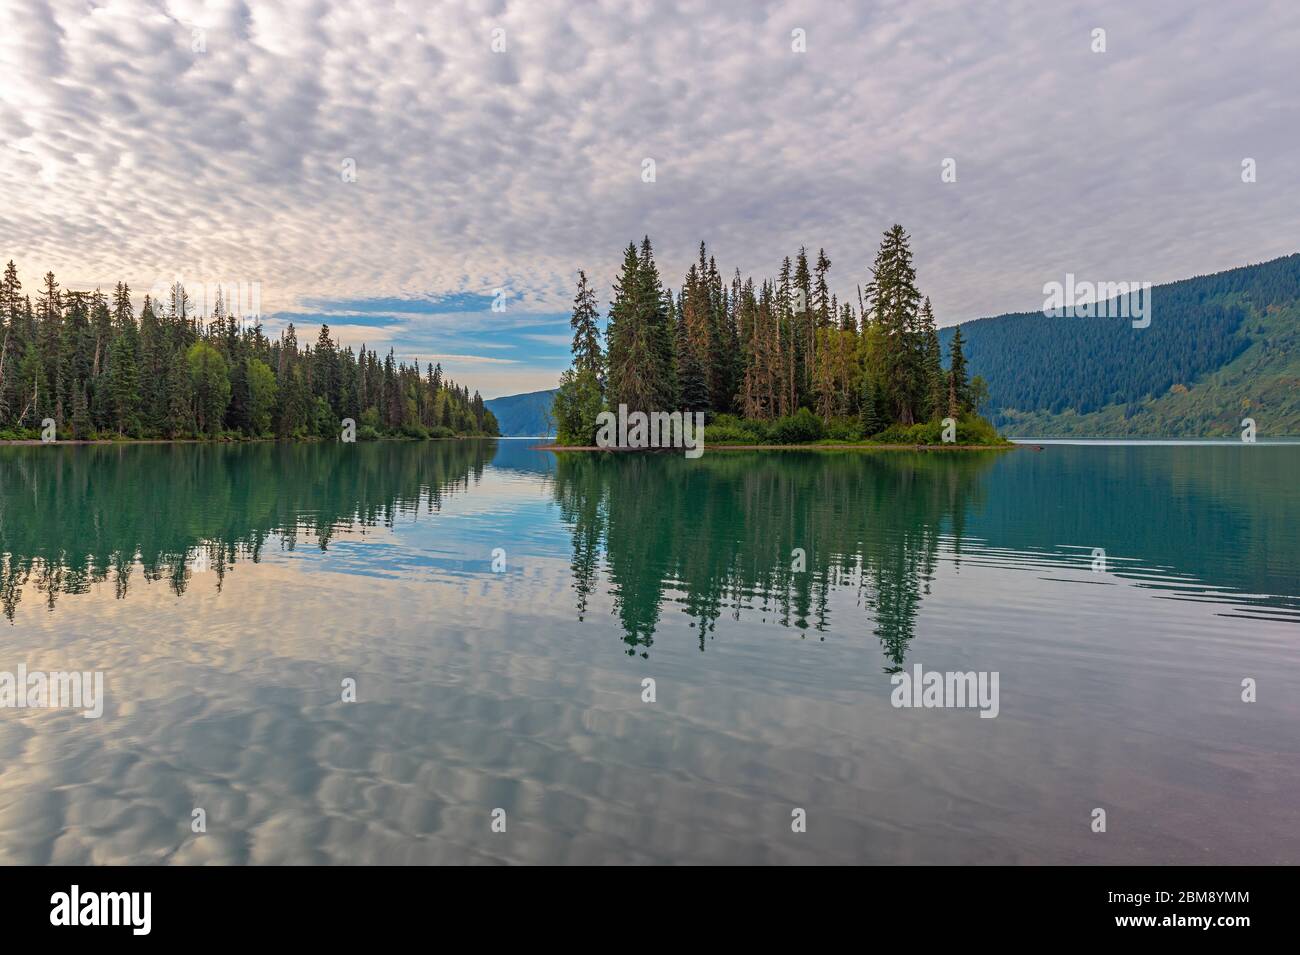 Sunrise and reflection of Pine Trees in Mirror Lake, Banff national park, Alberta, Canada. Stock Photo